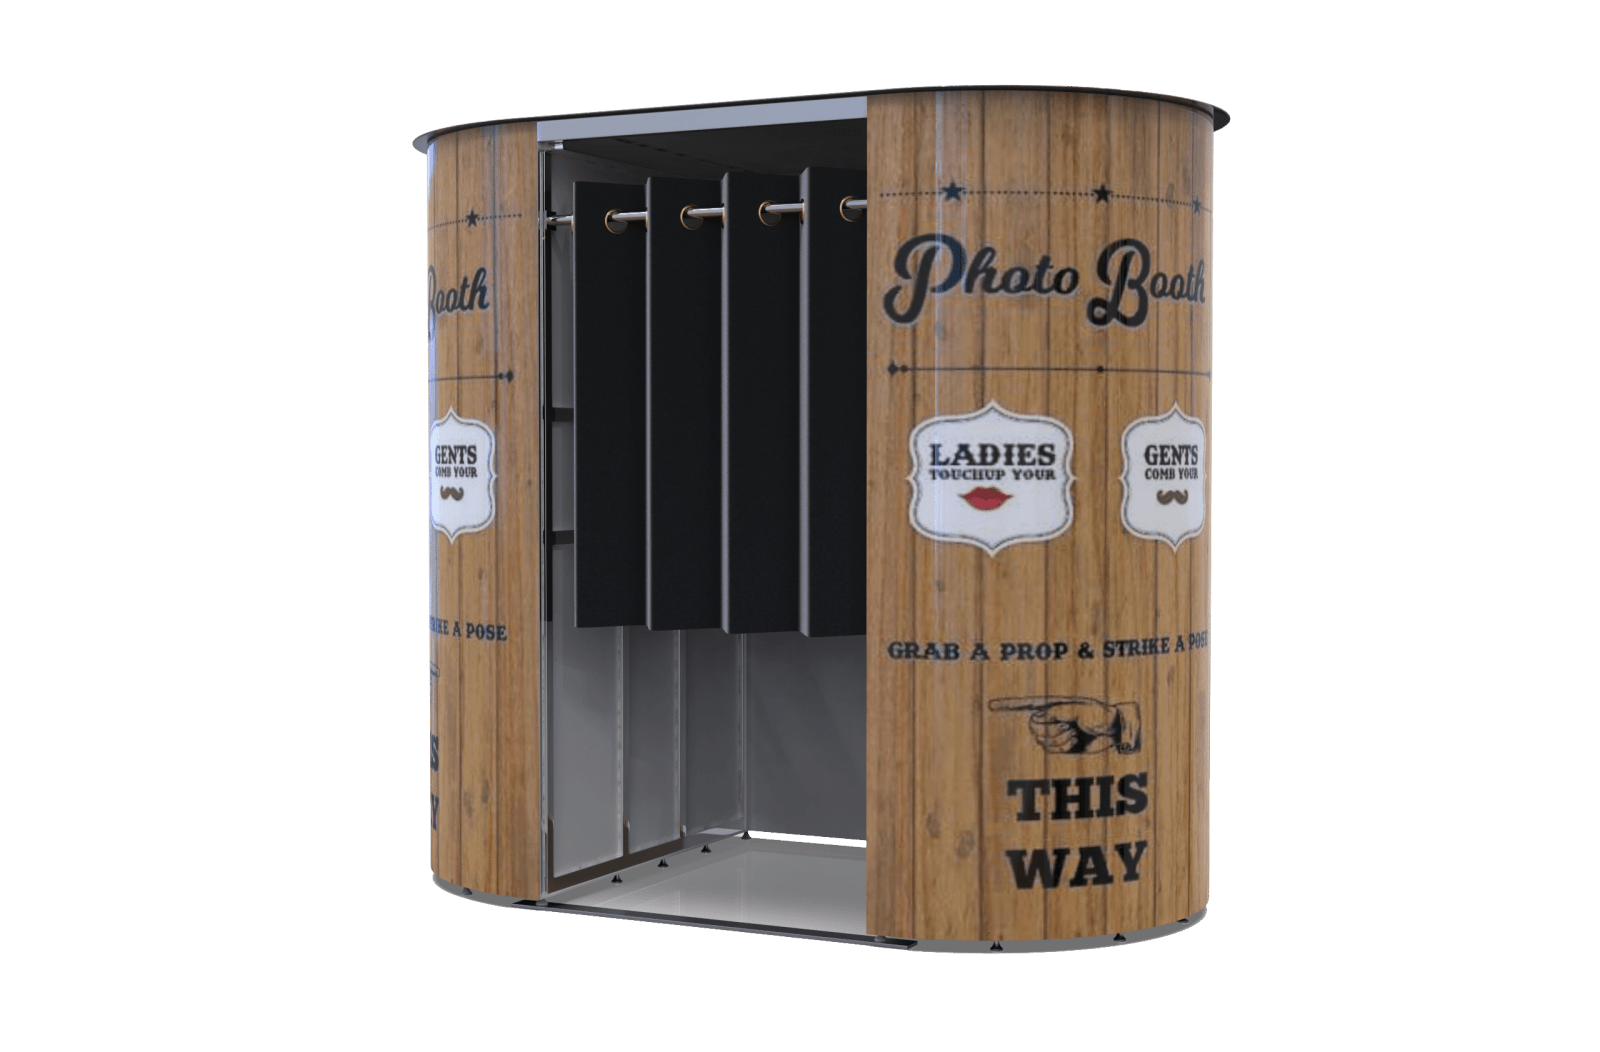 photo booth hire essex